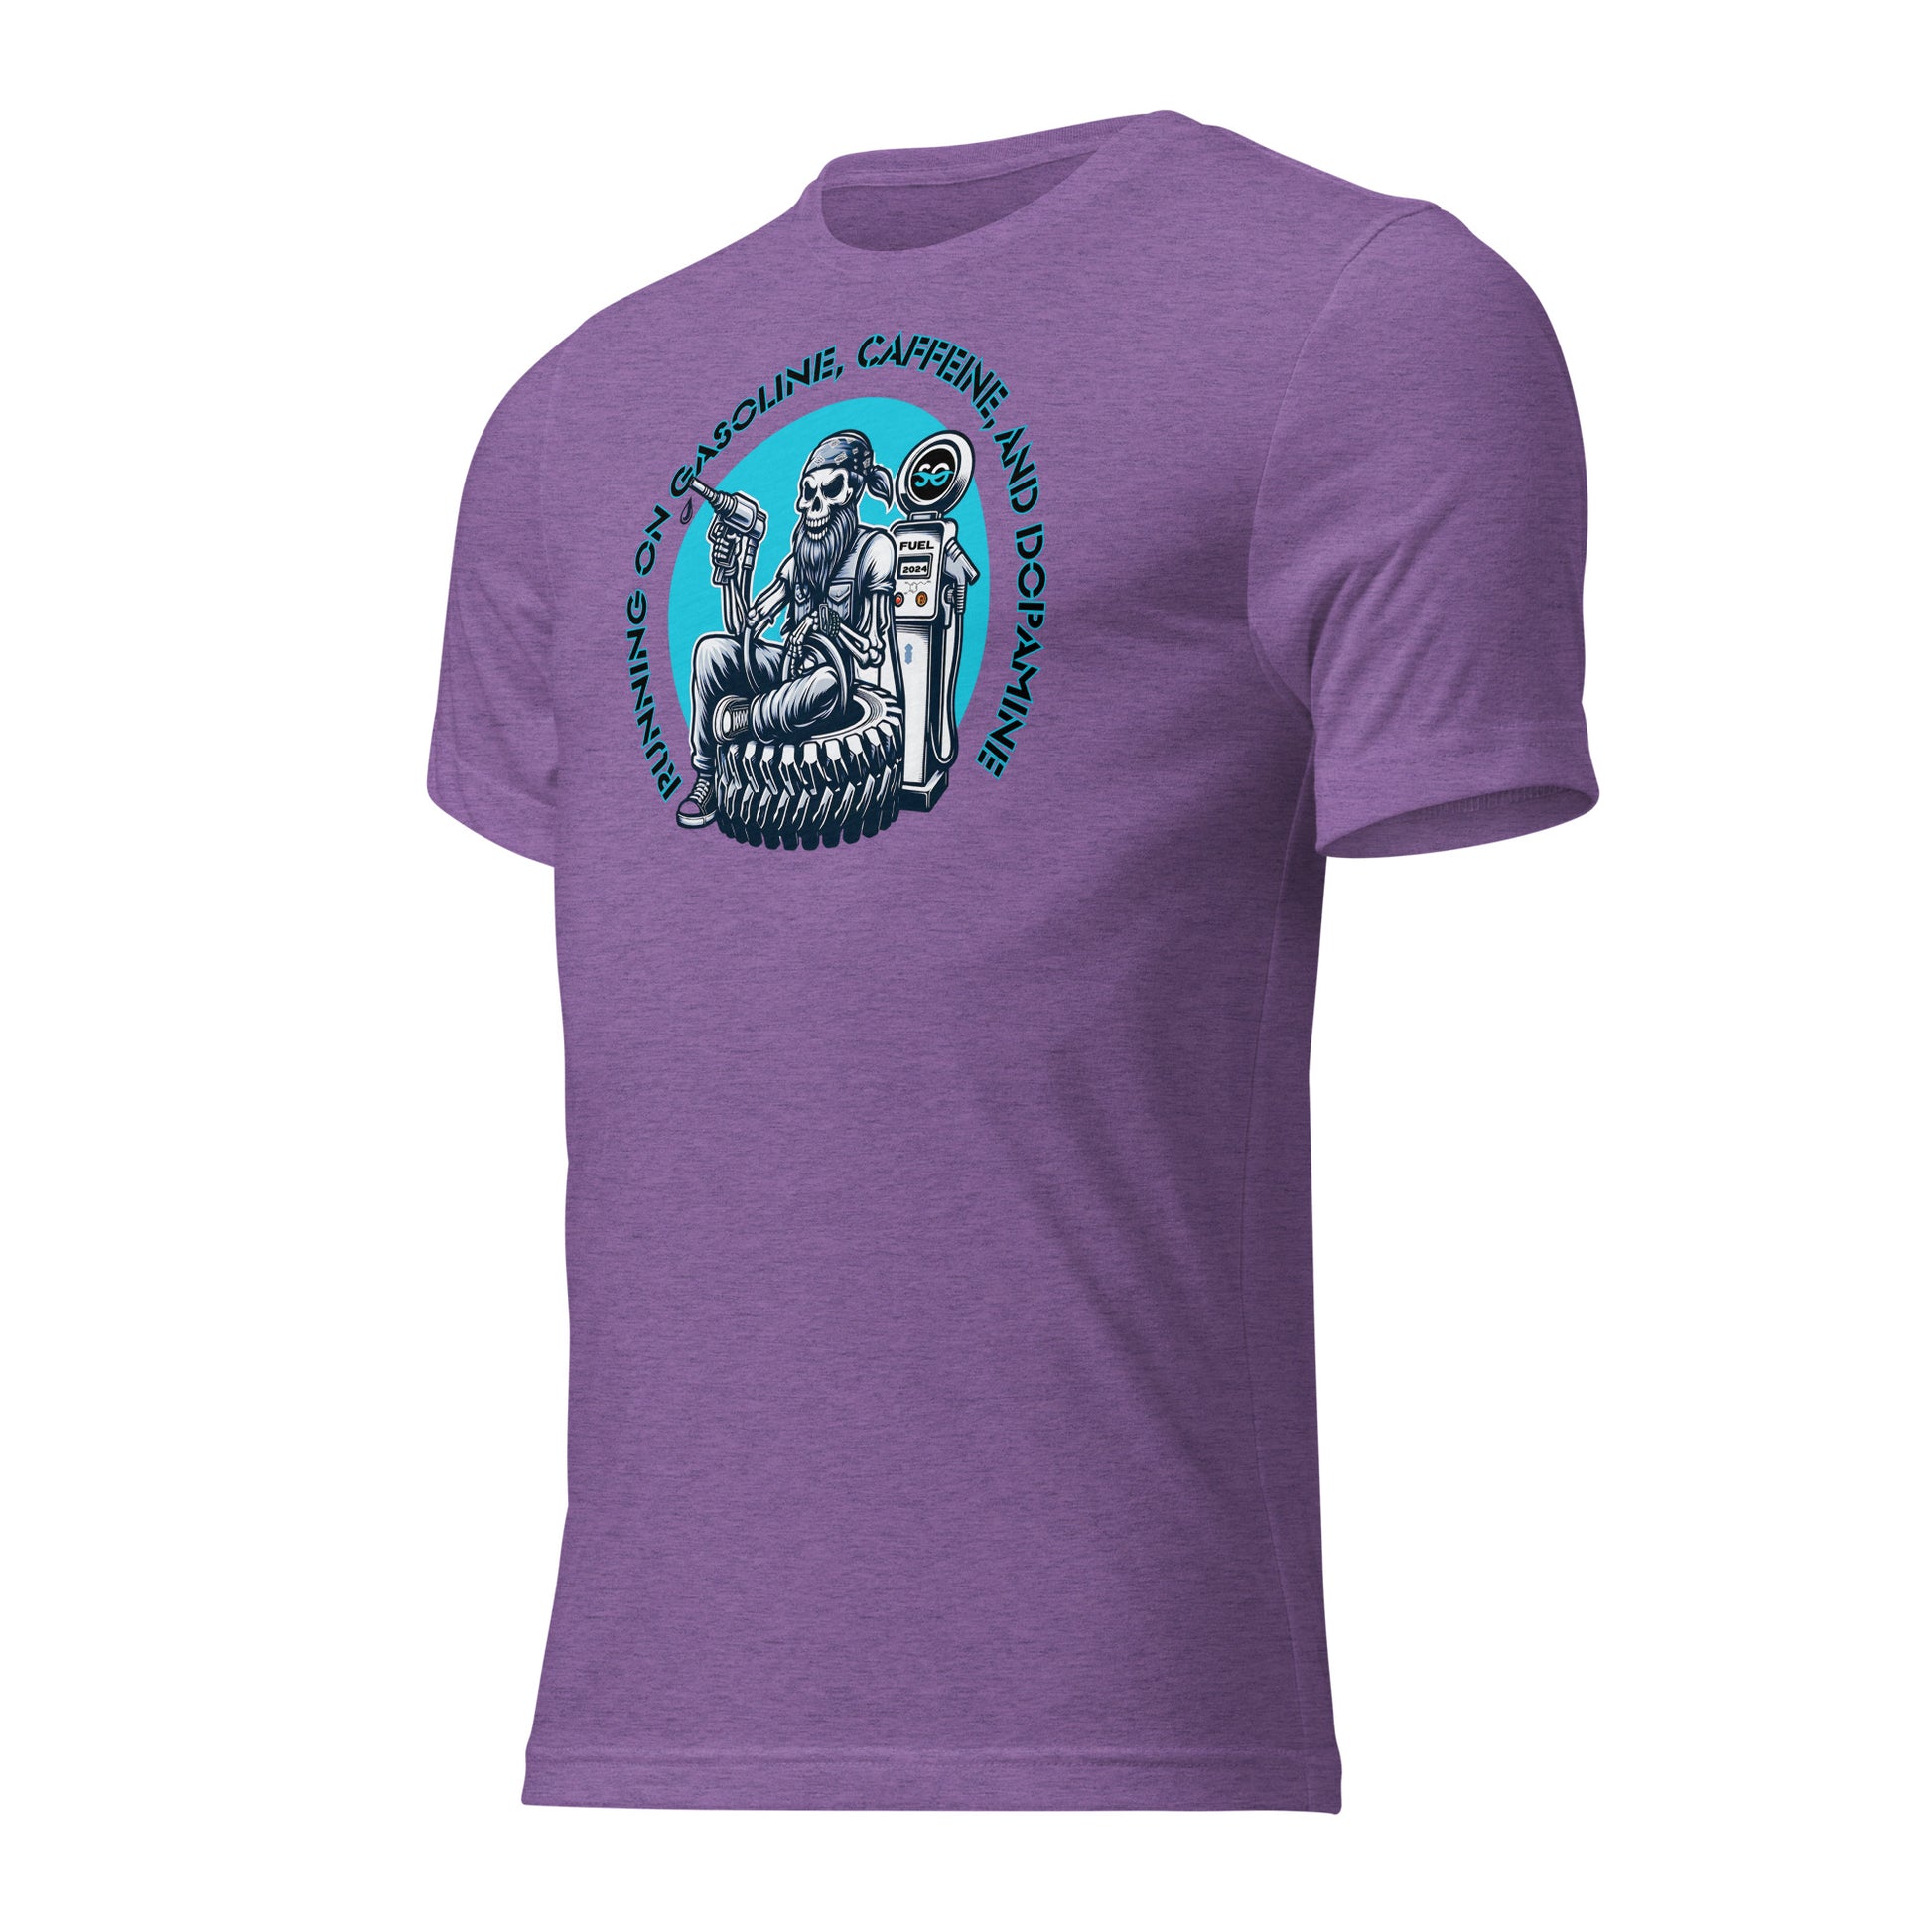 a purple shirt with a skeleton on it